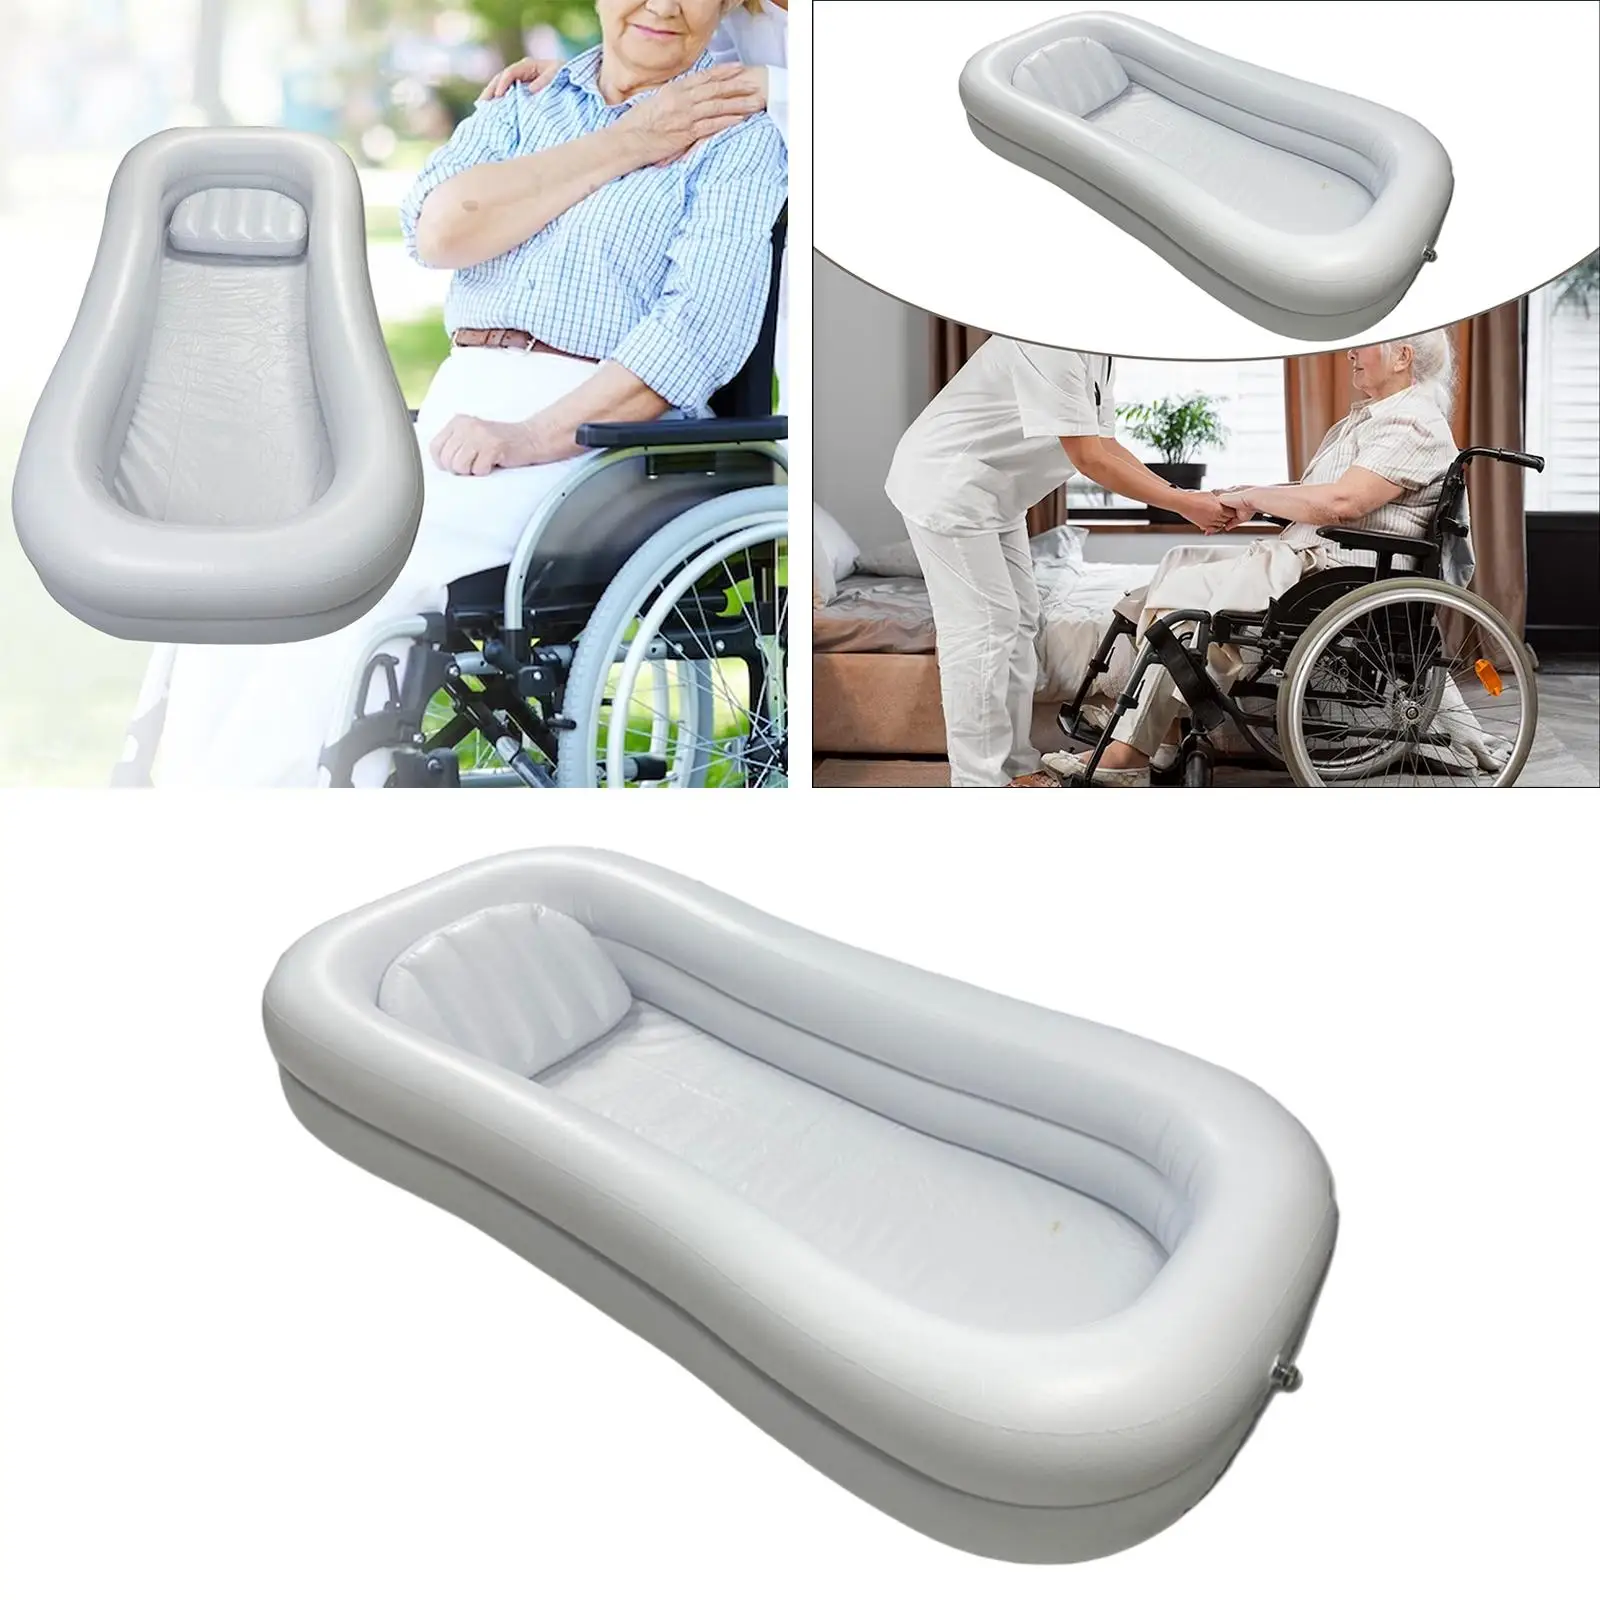 Inflatable Bathtub Adjustable Foldable Thicken Bath in Bed Assist Aid Bath Basin for Elderly Seniors Handicapped Disabled Adults